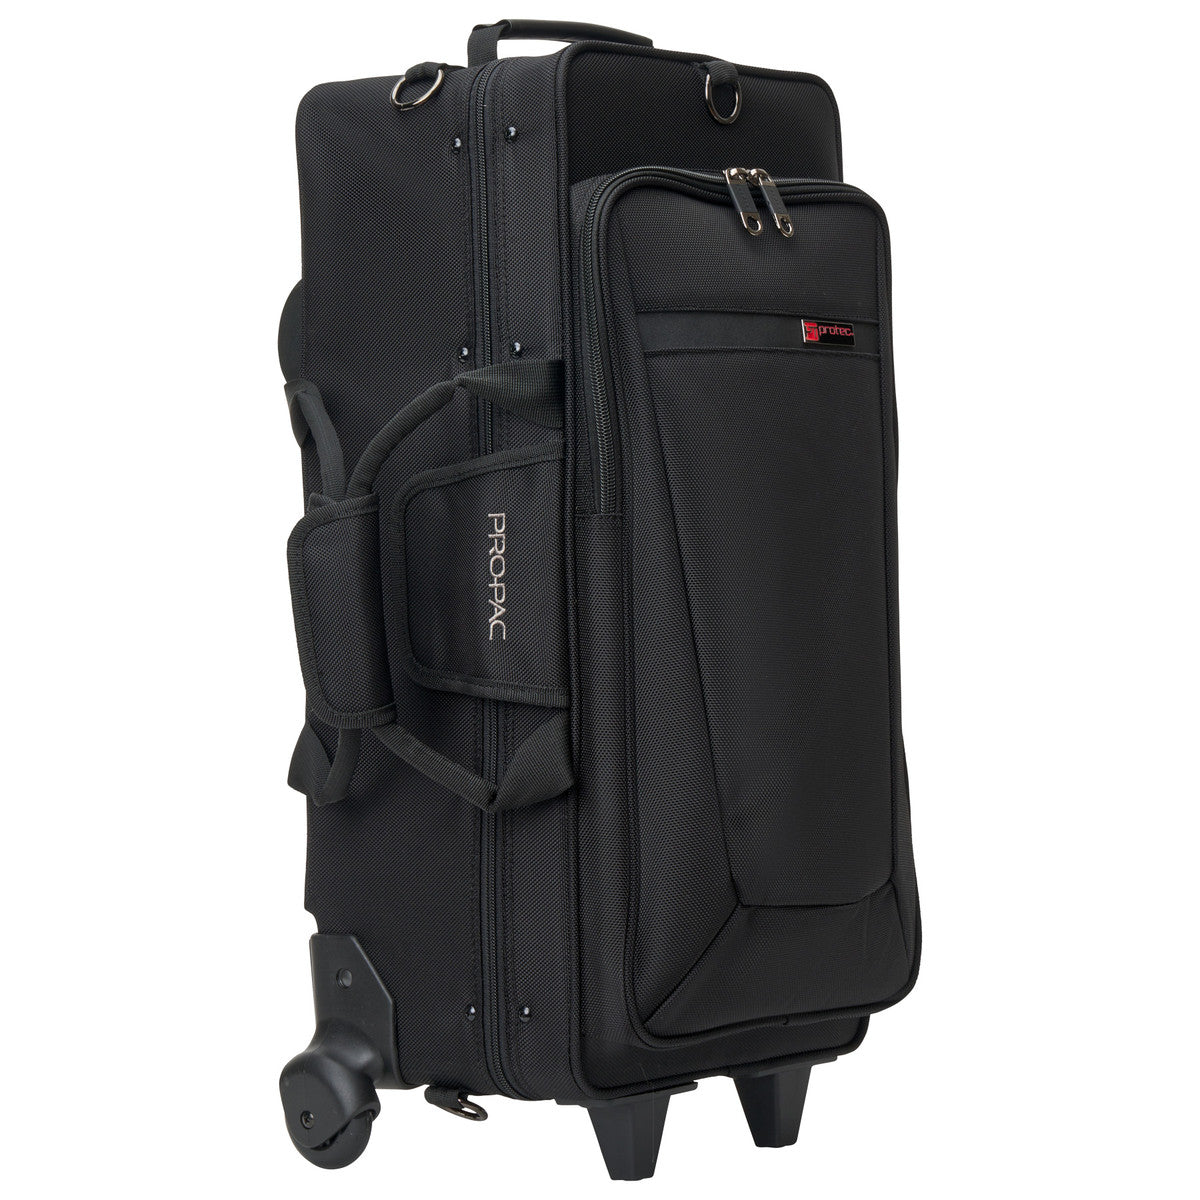 Protec iPac Double Trumpet Case with Wheels IP301DWL